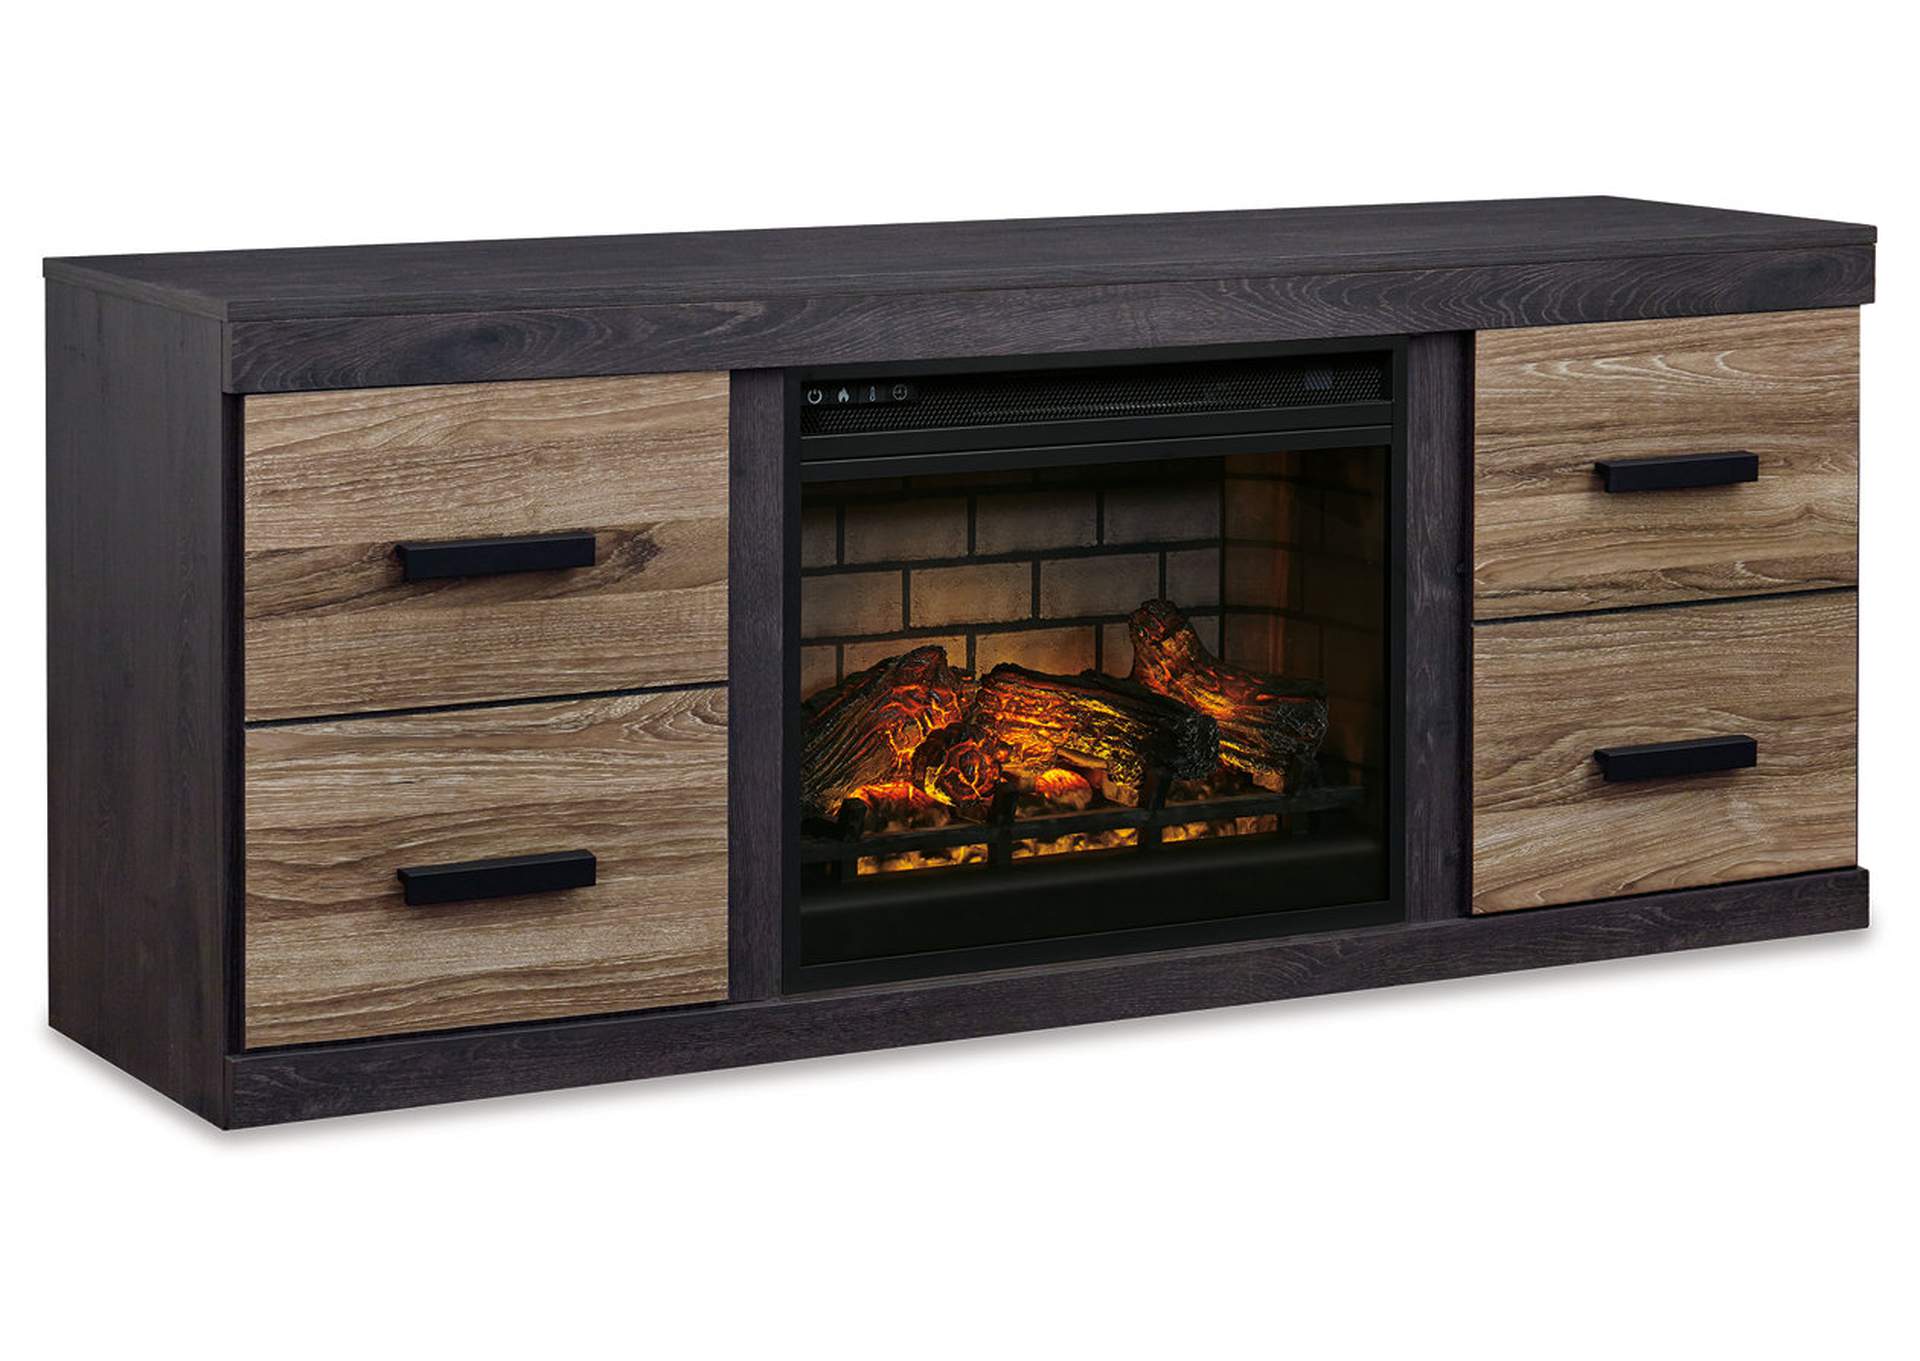 Harlinton 63" TV Stand with Electric Fireplace,Signature Design By Ashley